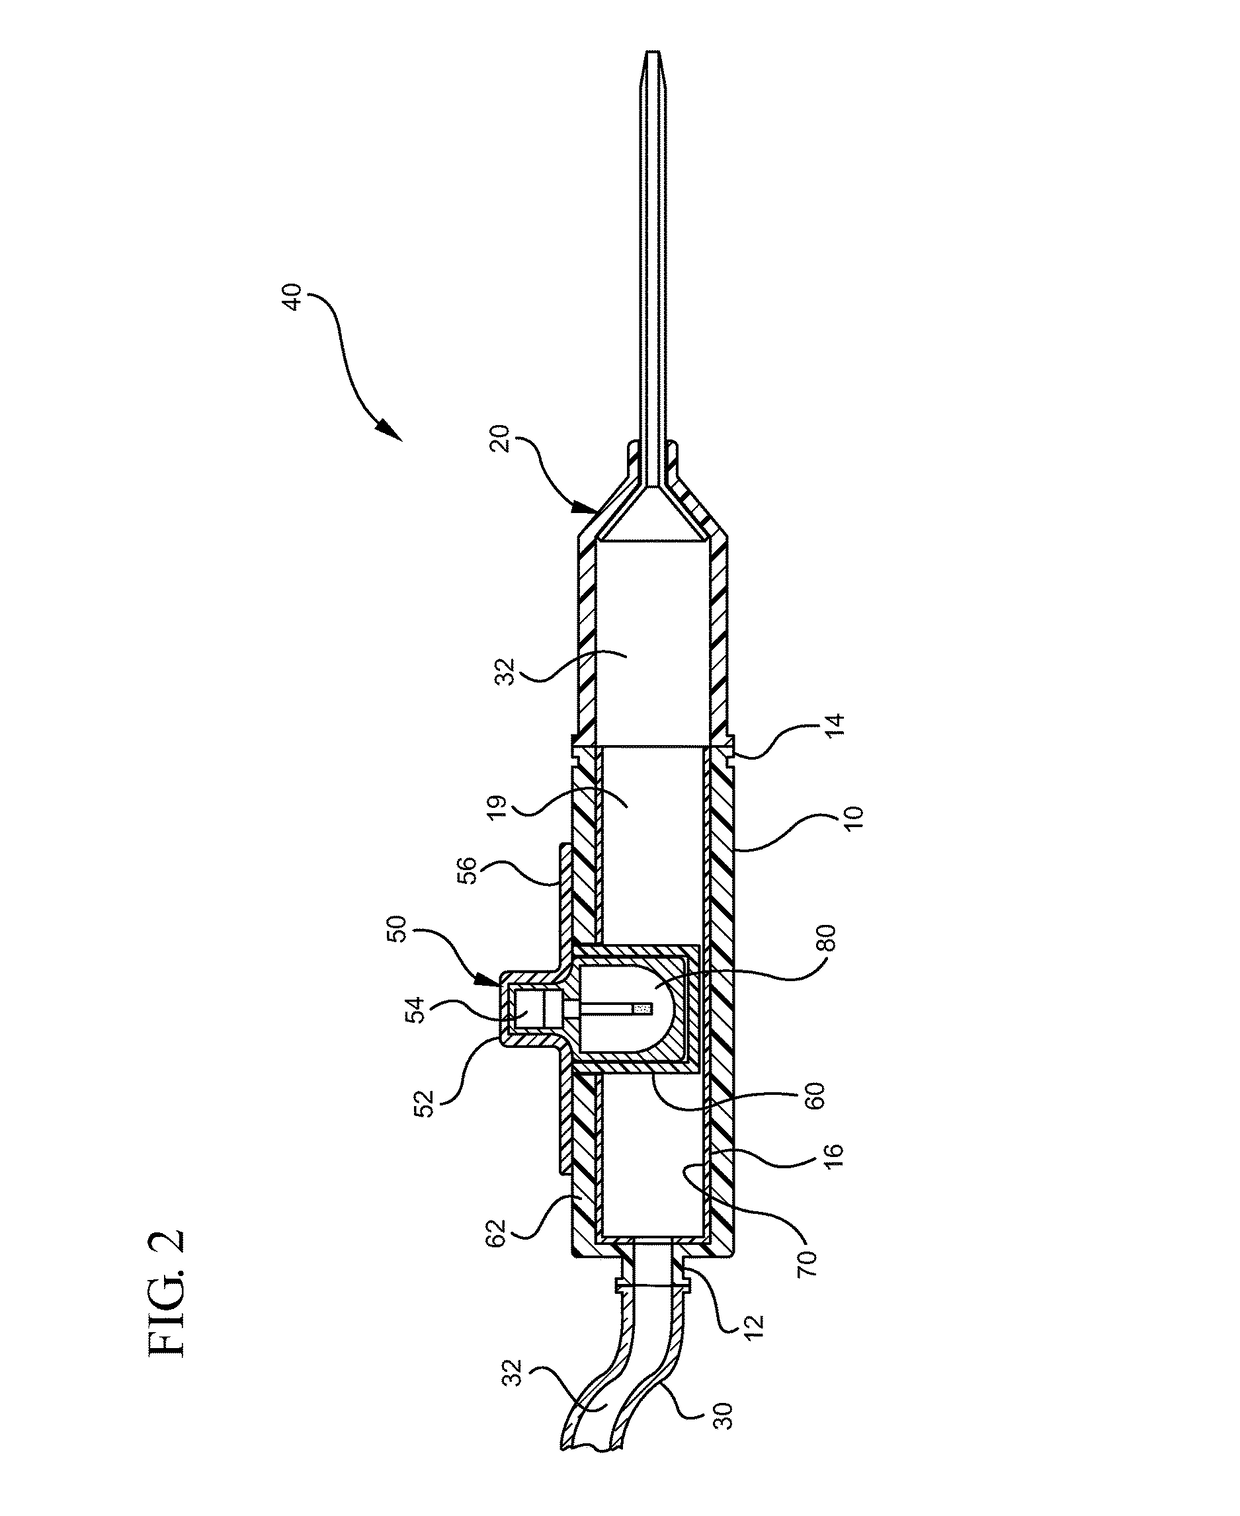 Catheter adapter having UV-C antimicrobial radiation source and access window within catheter lumen for intravenous therapy